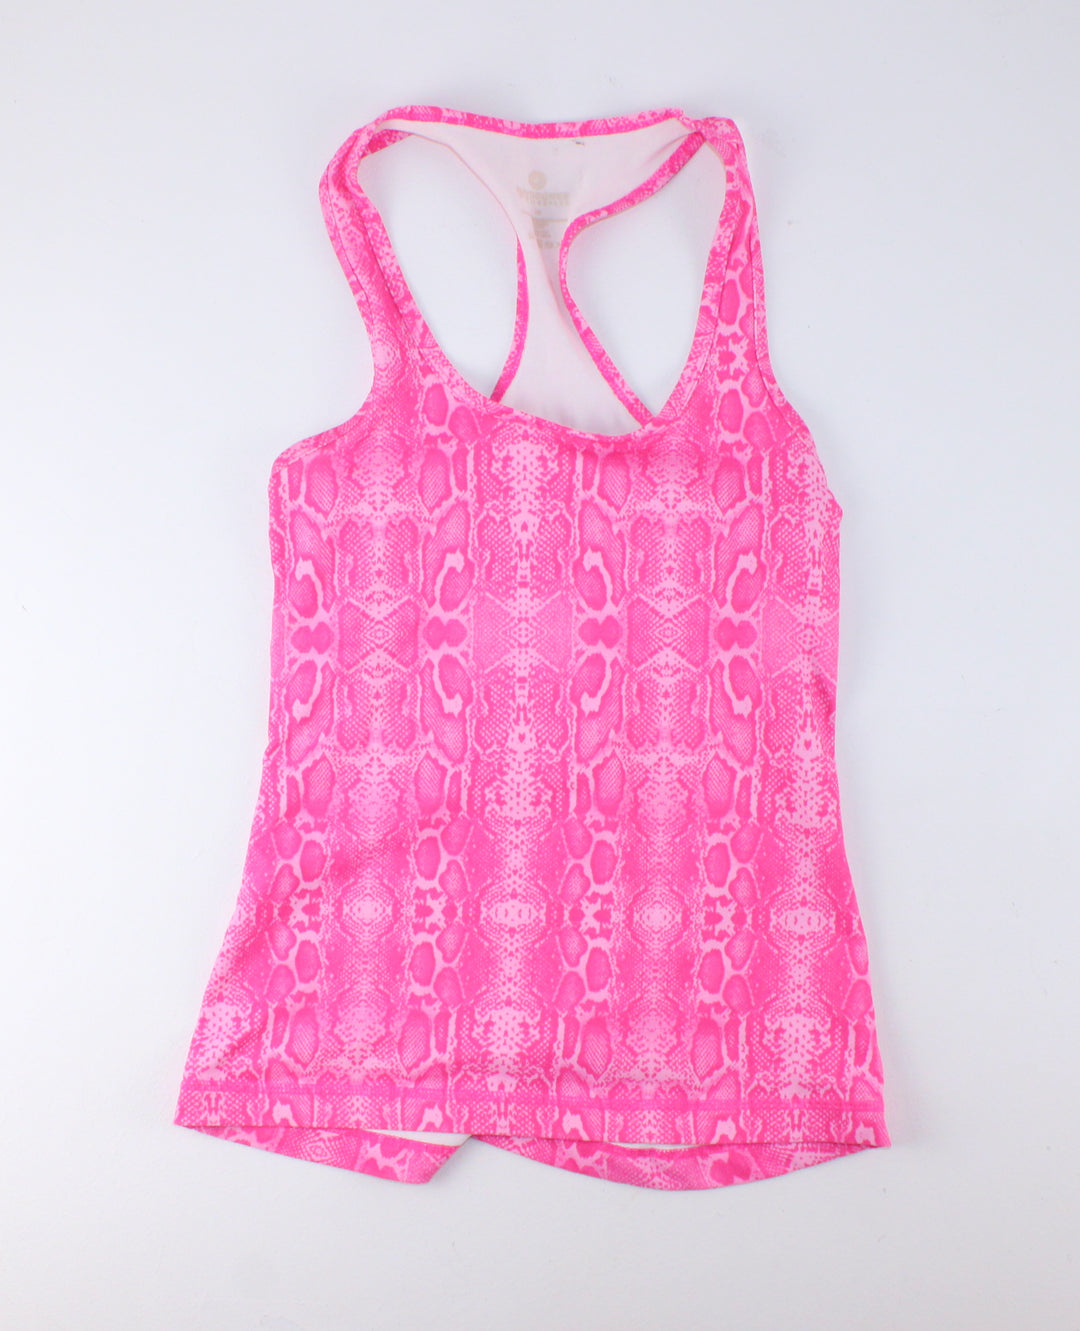 90 DEGREES PINK RACERBACK TANK APPROX 14Y EUC